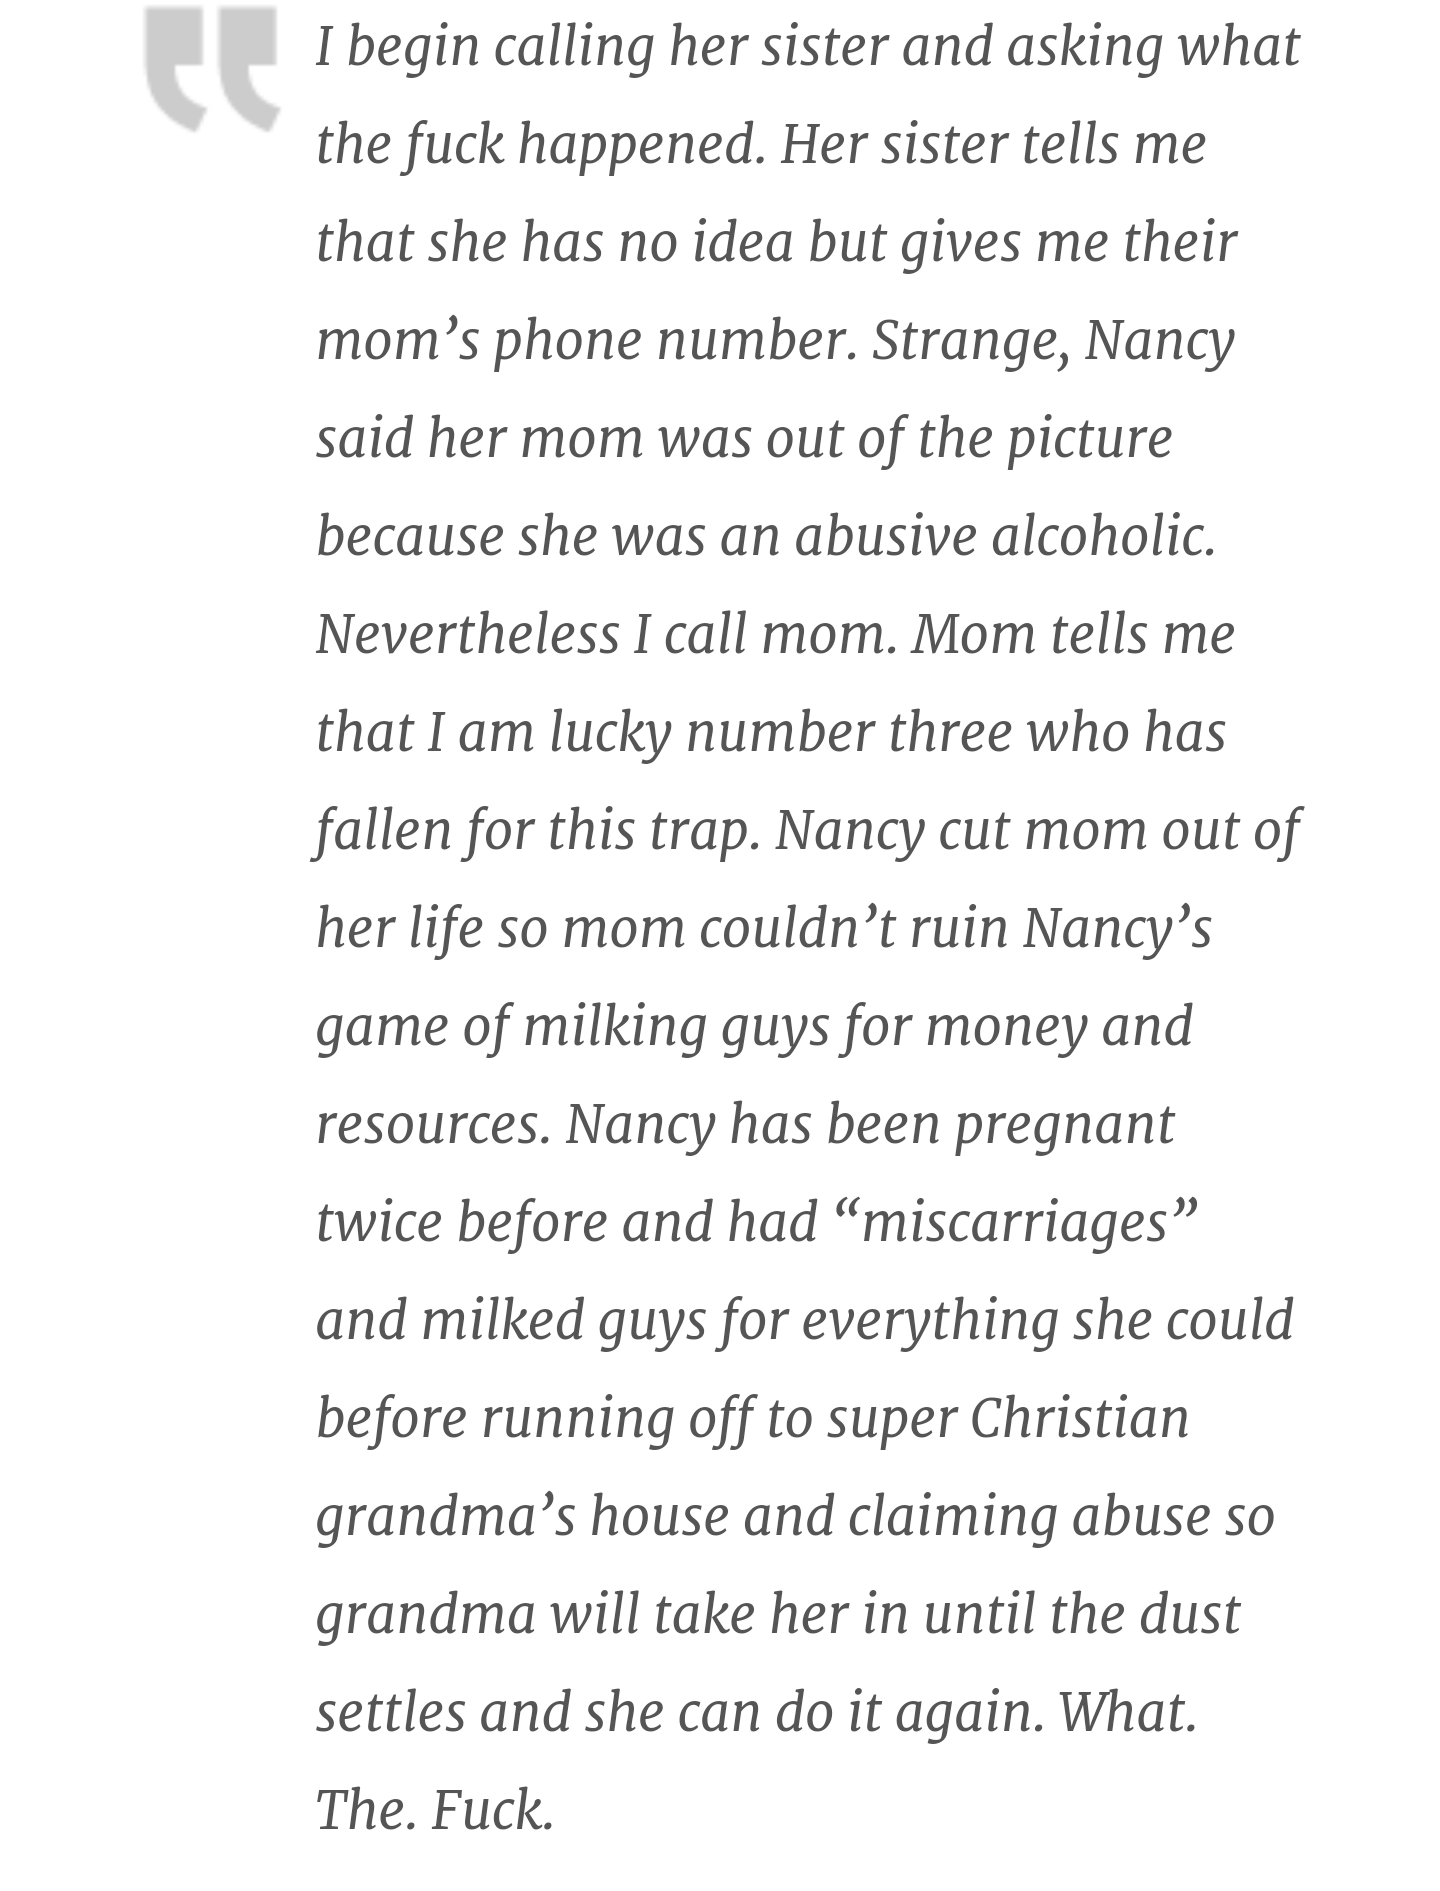 document - I begin calling her sister and asking what the fuck happened. Her sister tells me that she has no idea but gives me their mom's phone number. Strange, Nancy said her mom was out of the picture because she was an abusive alcoholic. Nevertheless 